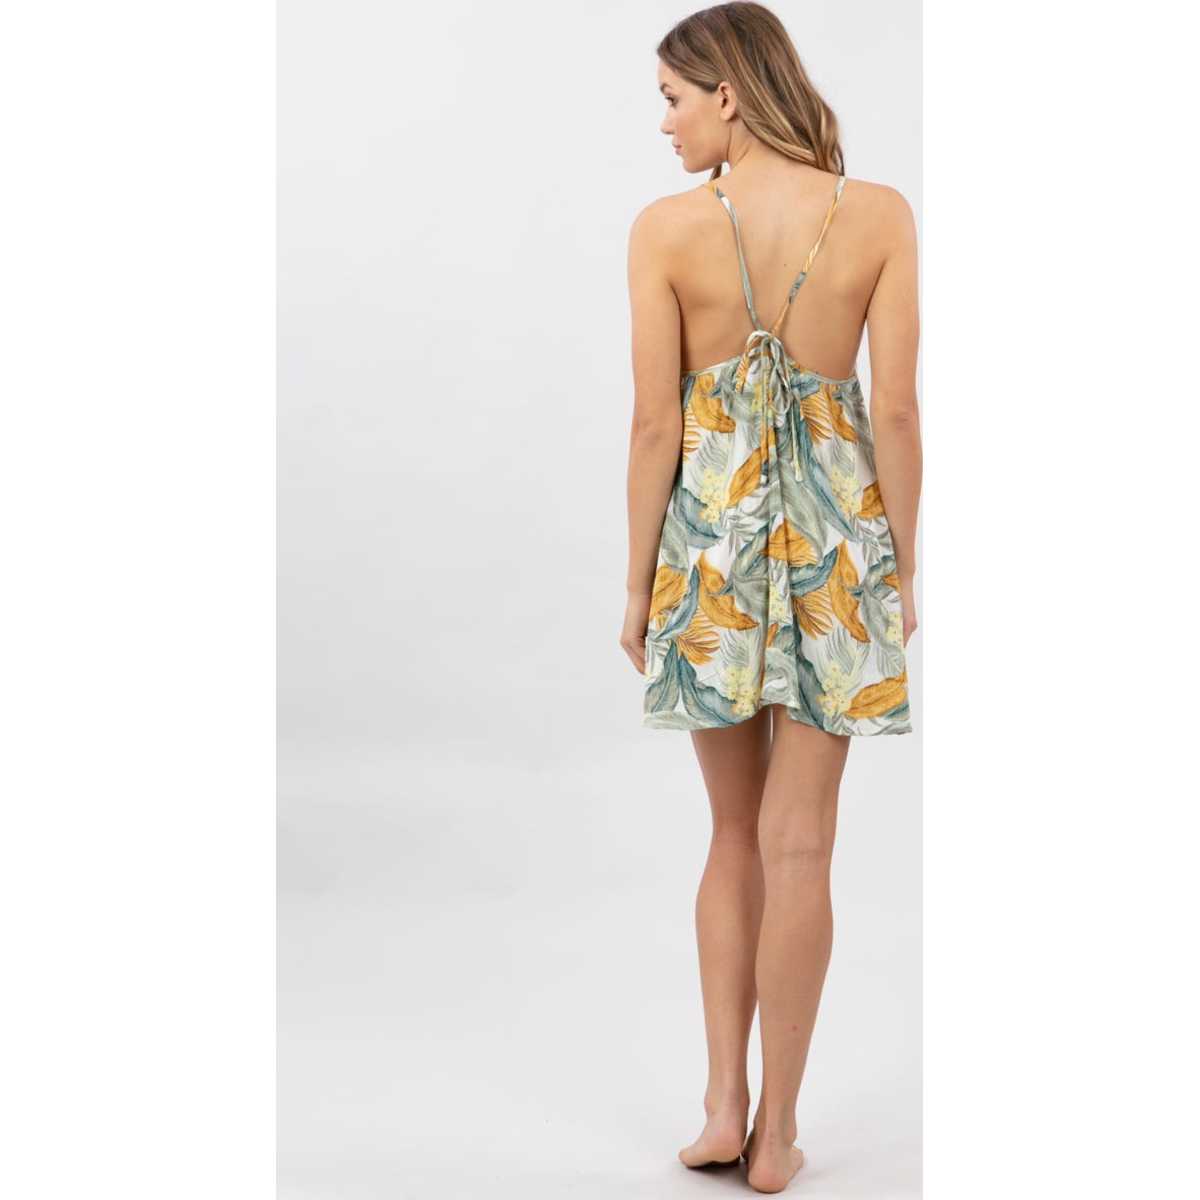 Tropic Sol Cover Up in Vanilla